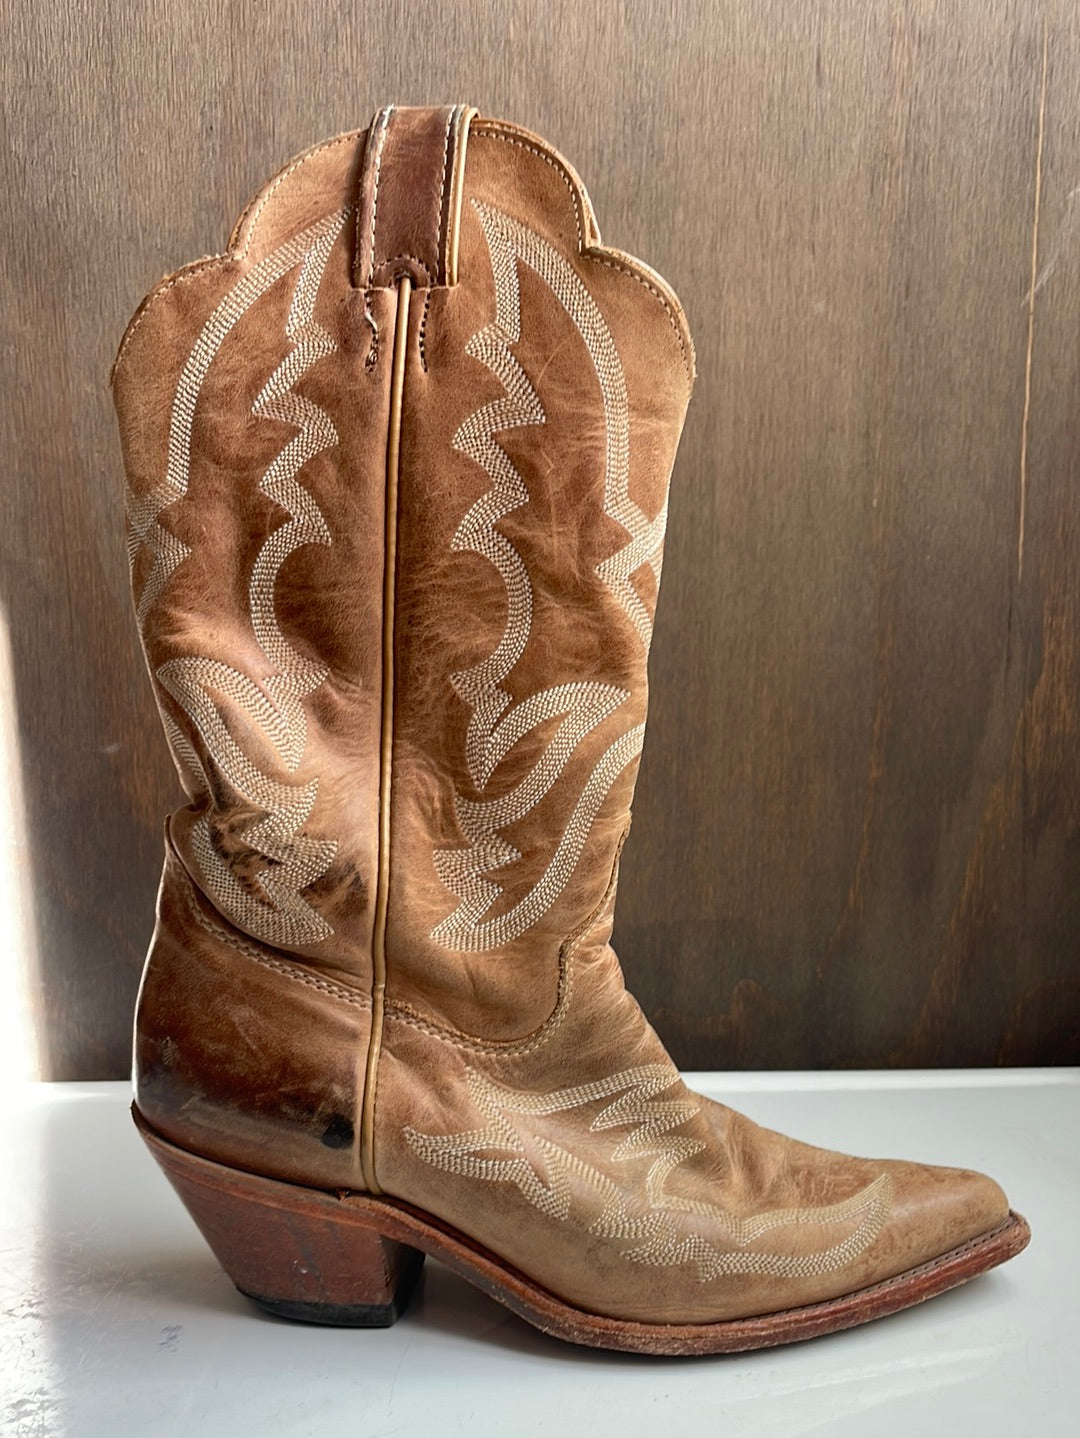 Justin’s Tan Tall Boots with Embroidery